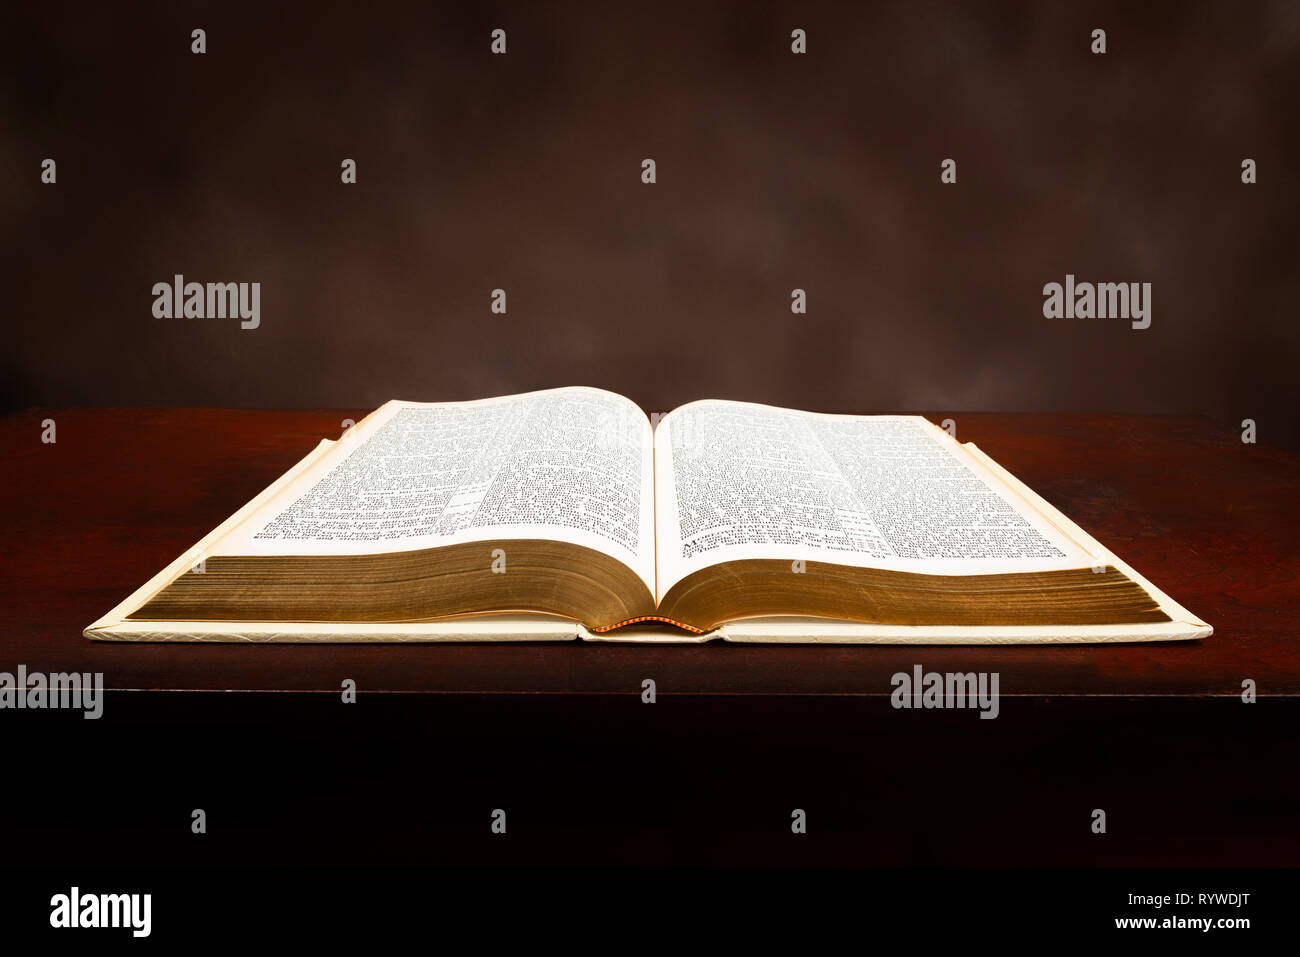 Horizontal close-up shot of an old Bible lying open on a brown background. Stock Photo